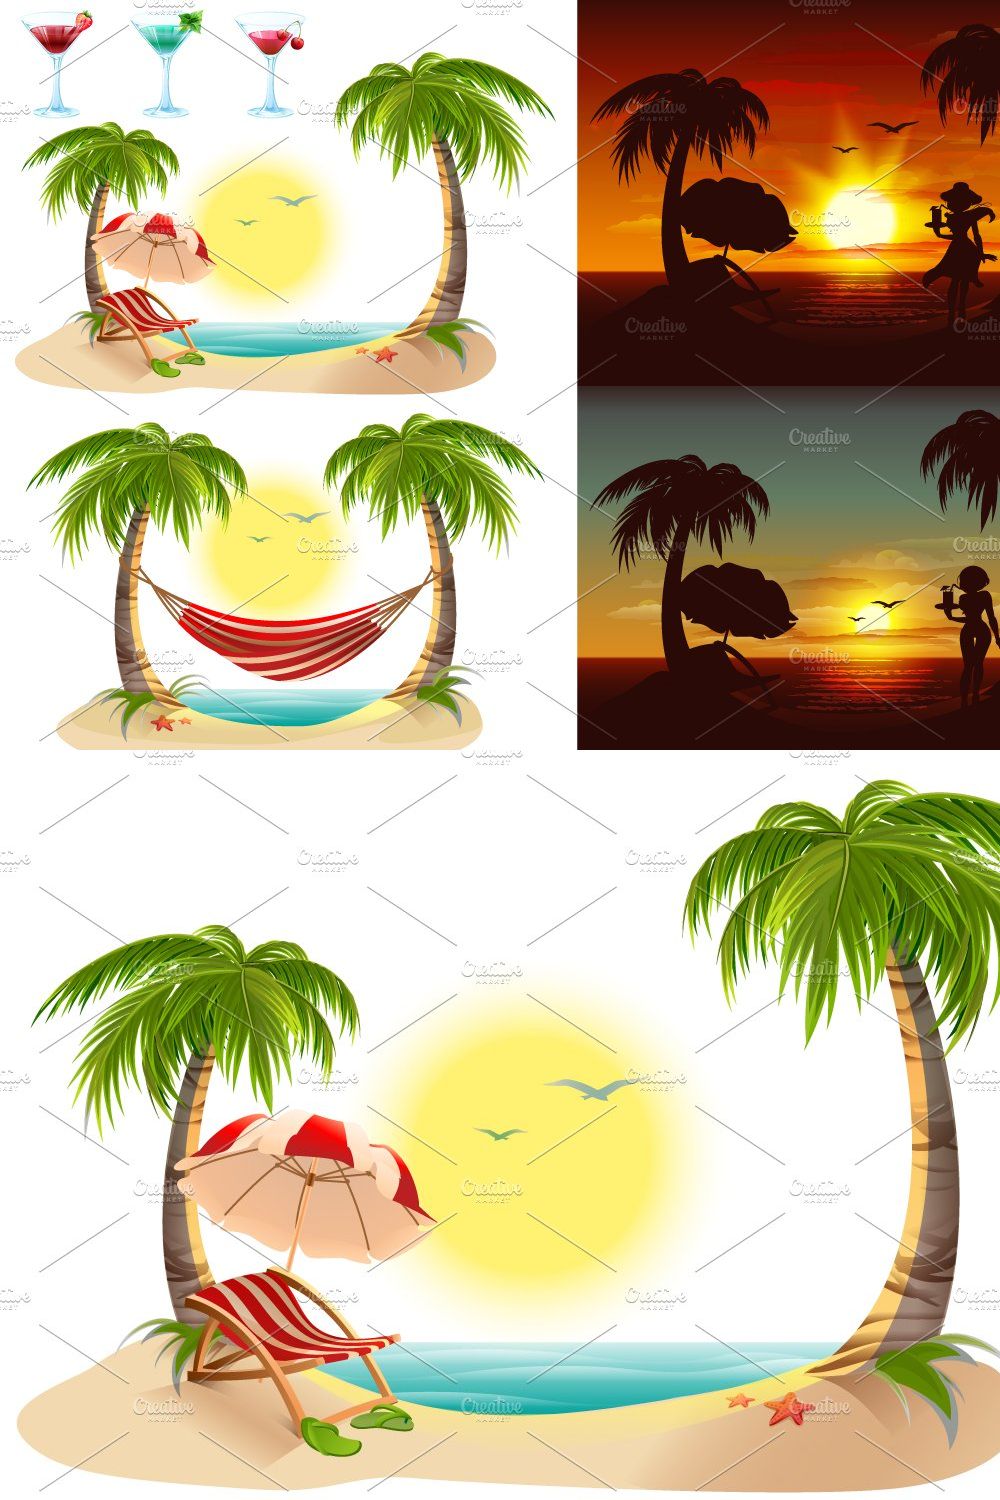 Evening sunset on tropical island pinterest preview image.